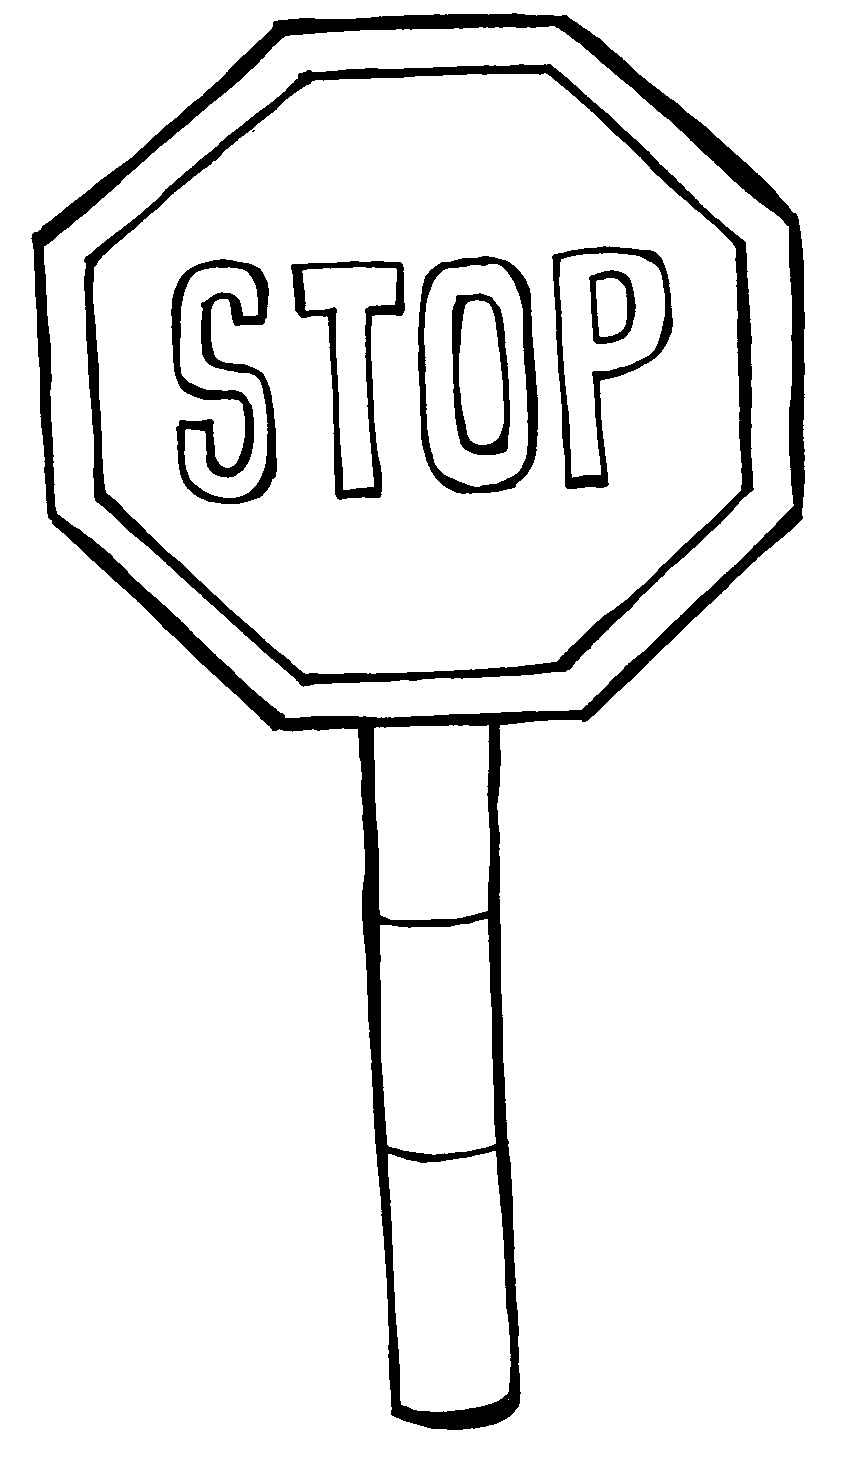 stop sign template free stop sign template printable download free clip art sign stop template 